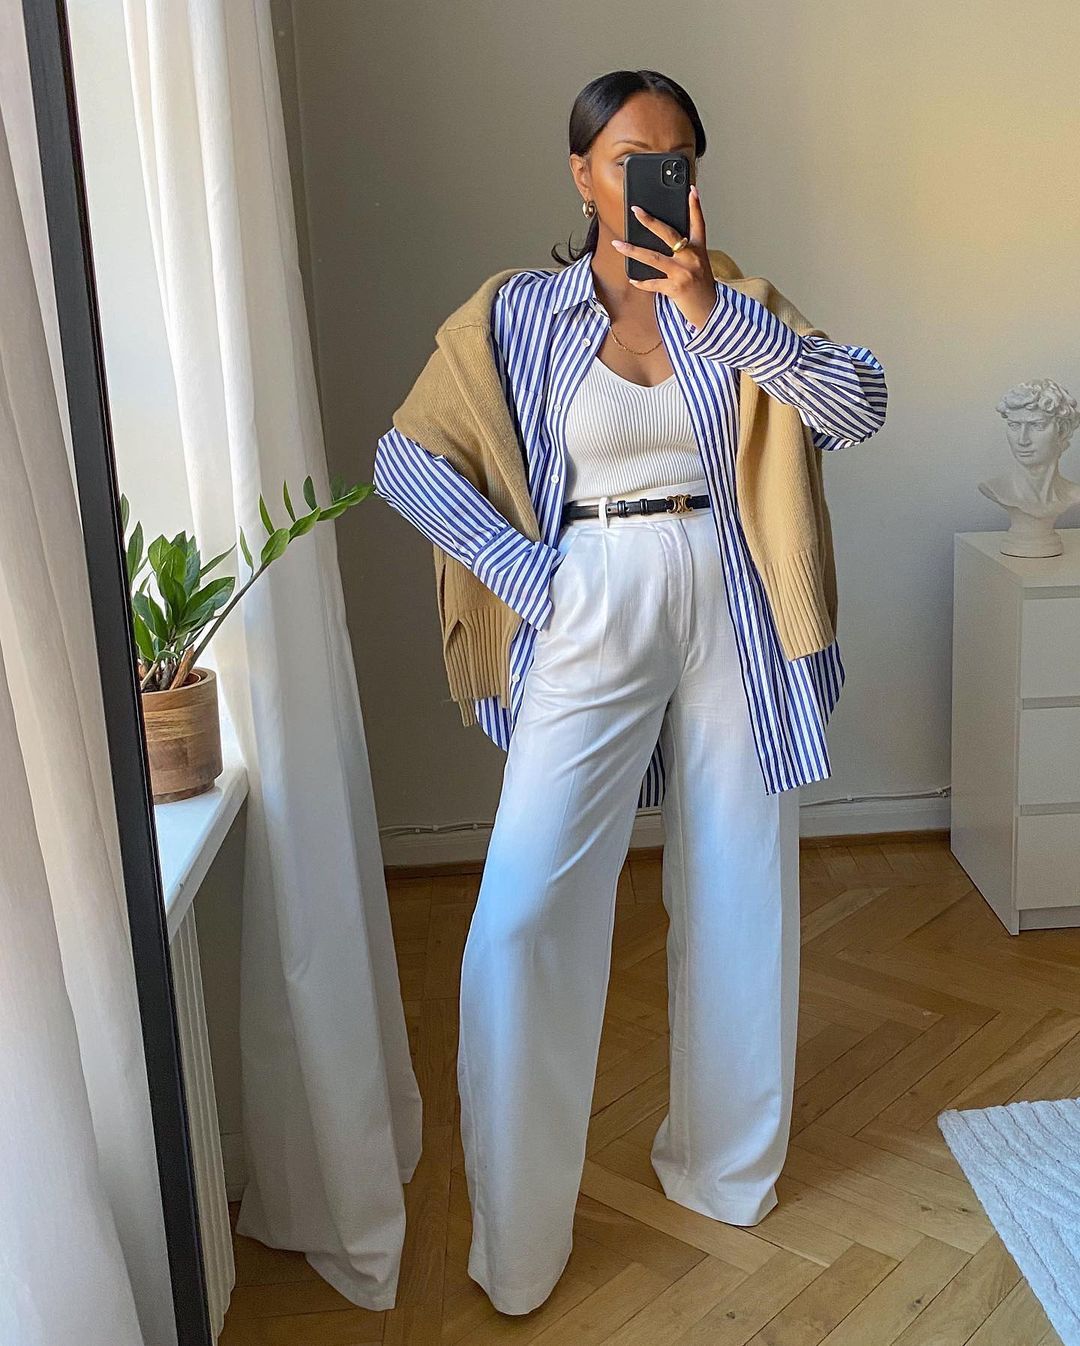 White trouser outfits: @femmeblk wears white trousers with a striped shirt